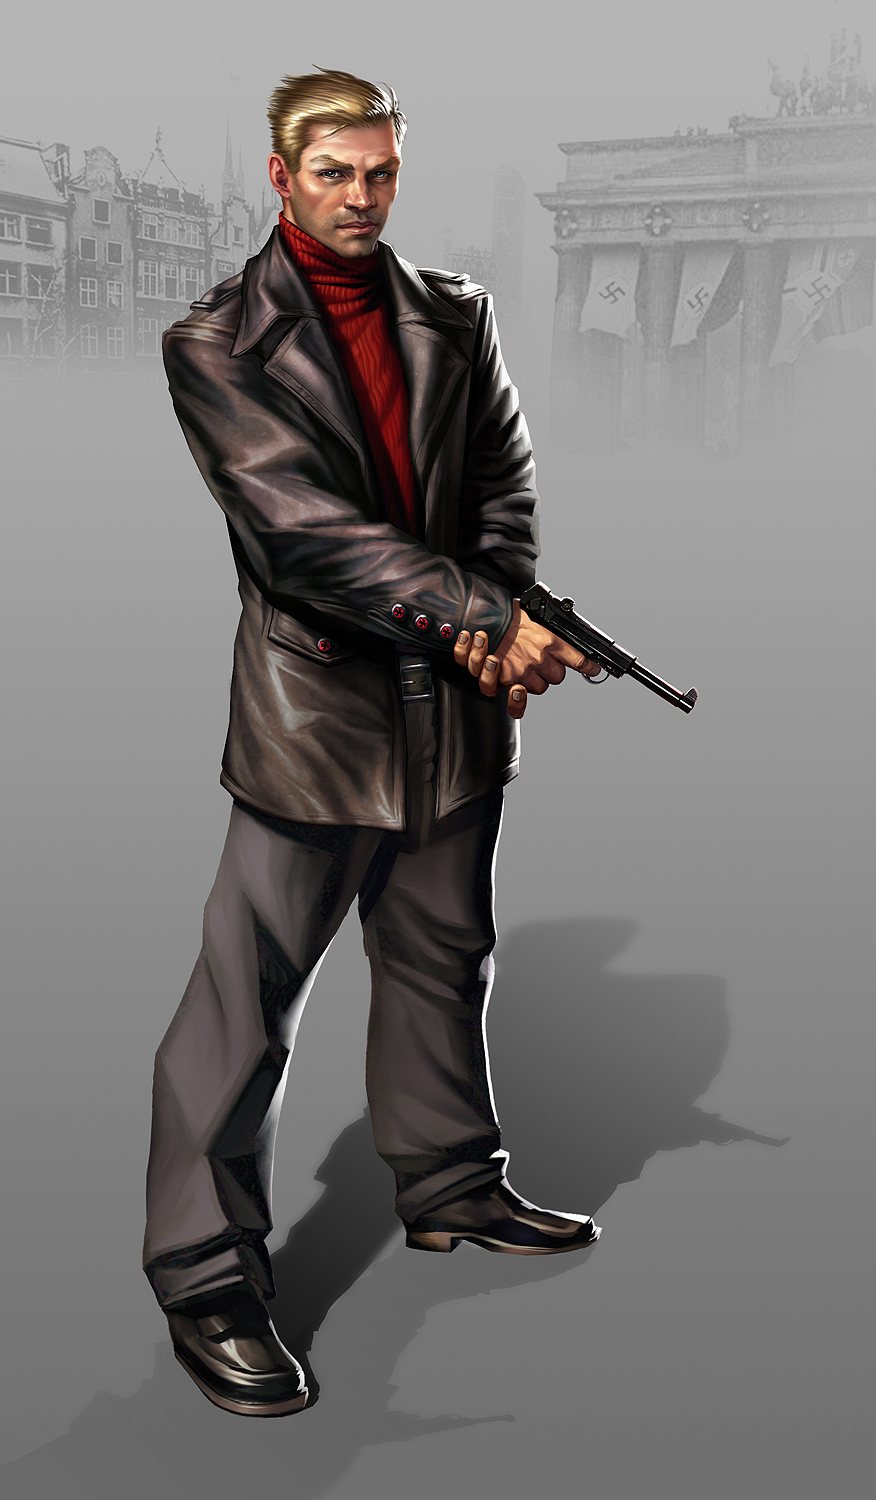 Spy_Game_pitch_by_Hedrus.jpg